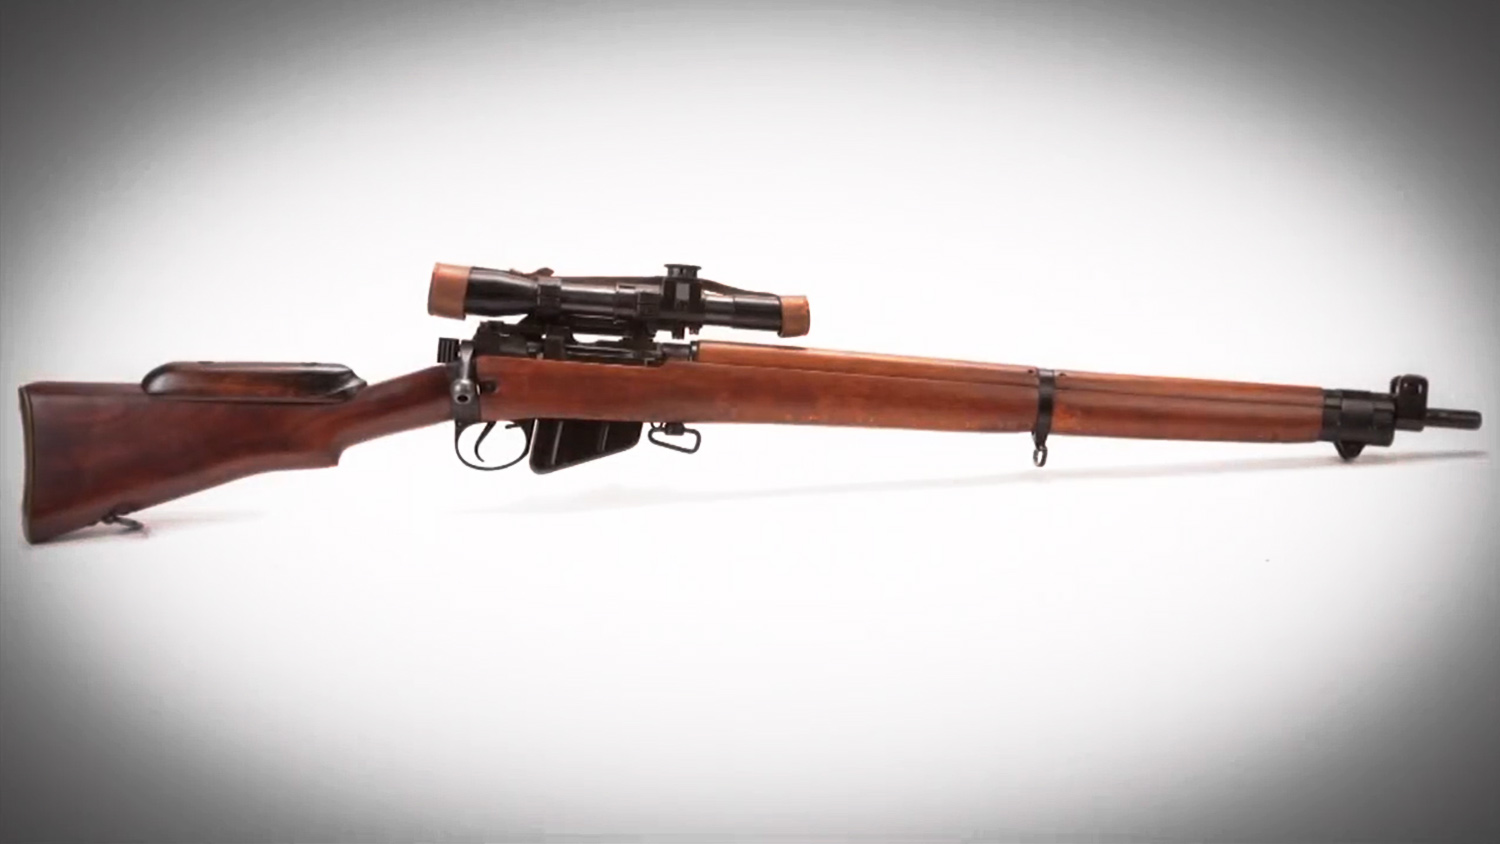 The Lee Enfield Model Line  Lee Enfield Rifle Association of